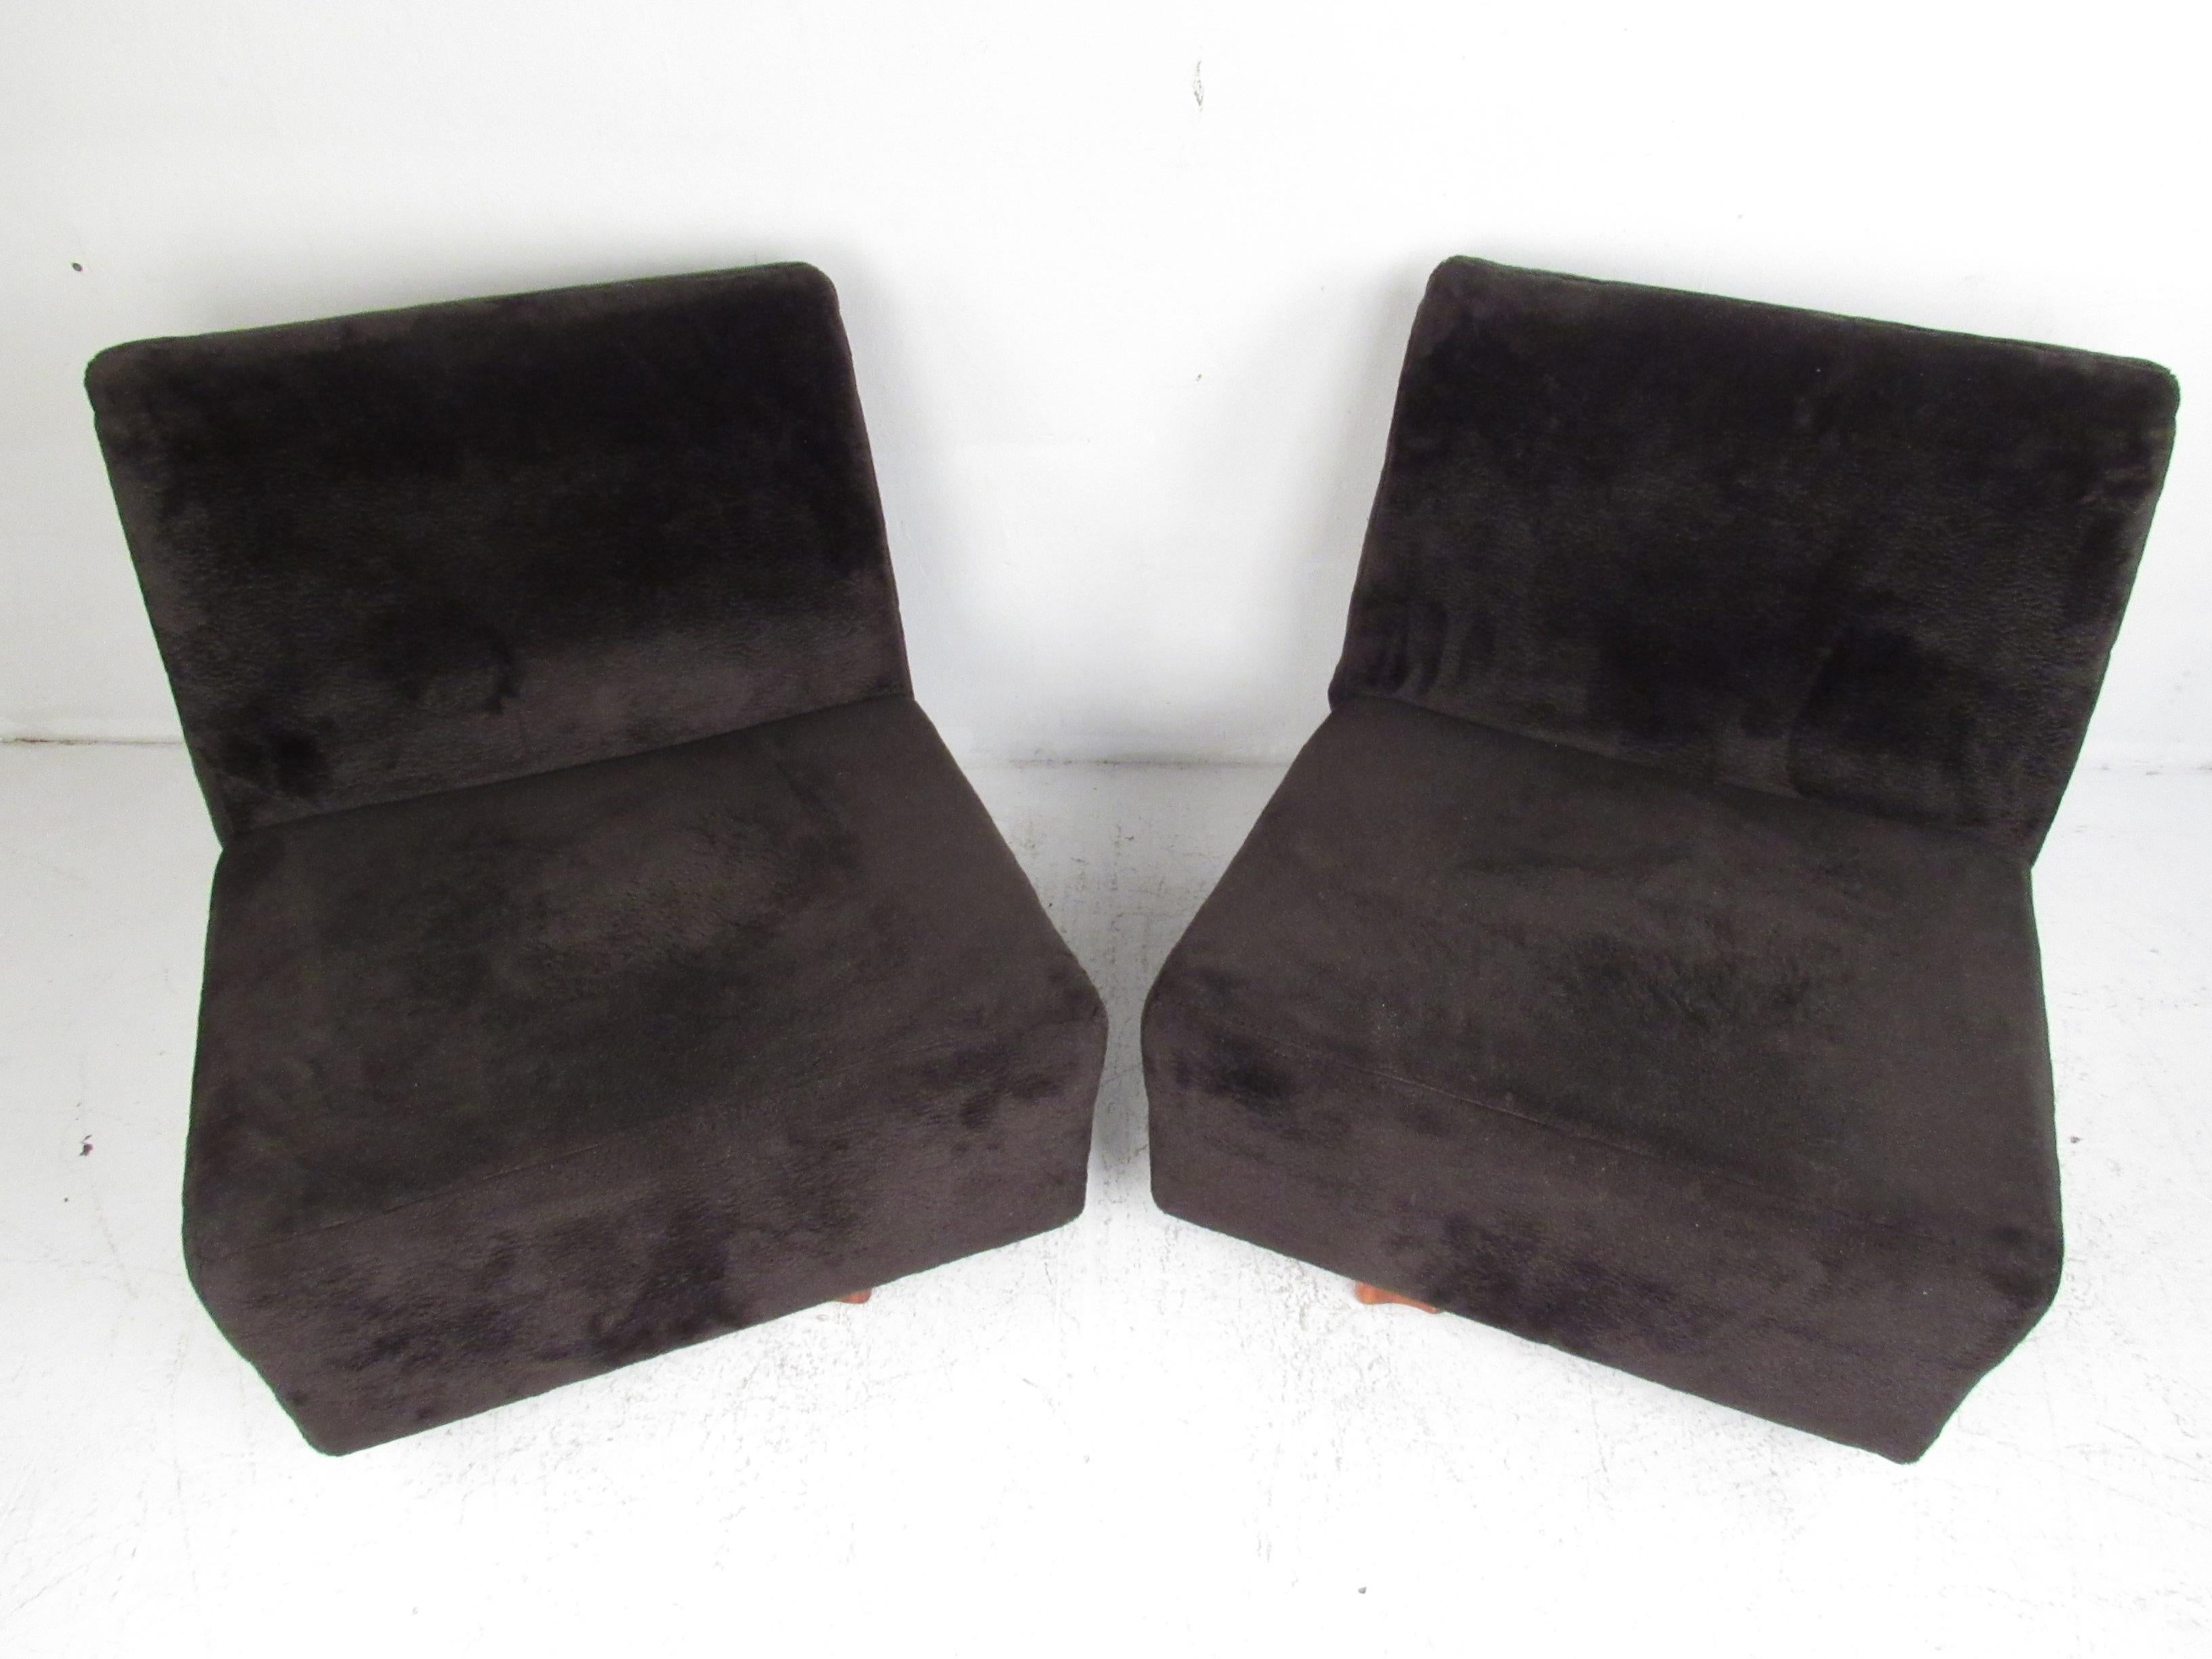 This beautiful pair of vintage modern lounge chairs feature a slipper design covered in plush black upholstery. The thick padded seating and wide design ensure maximum comfort. This pair of midcentury lounge chairs boast a brutalist style swivel